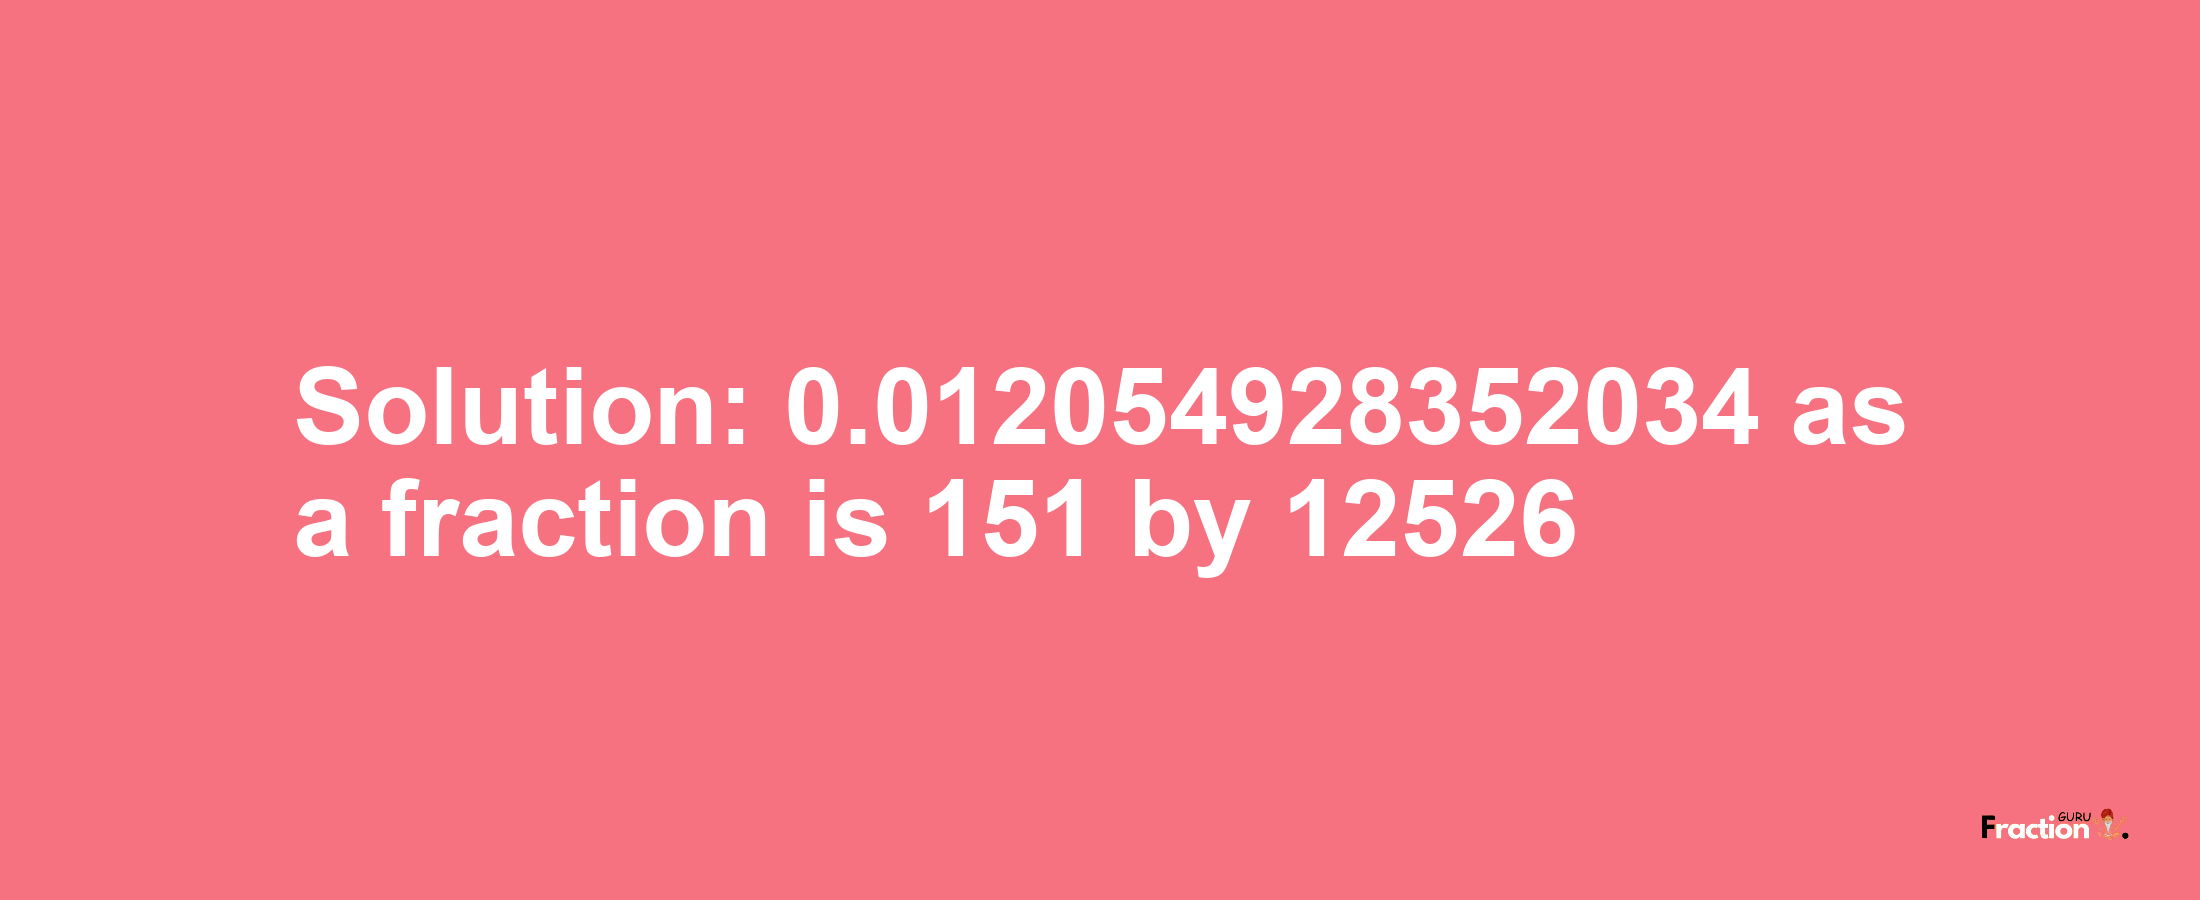 Solution:0.012054928352034 as a fraction is 151/12526